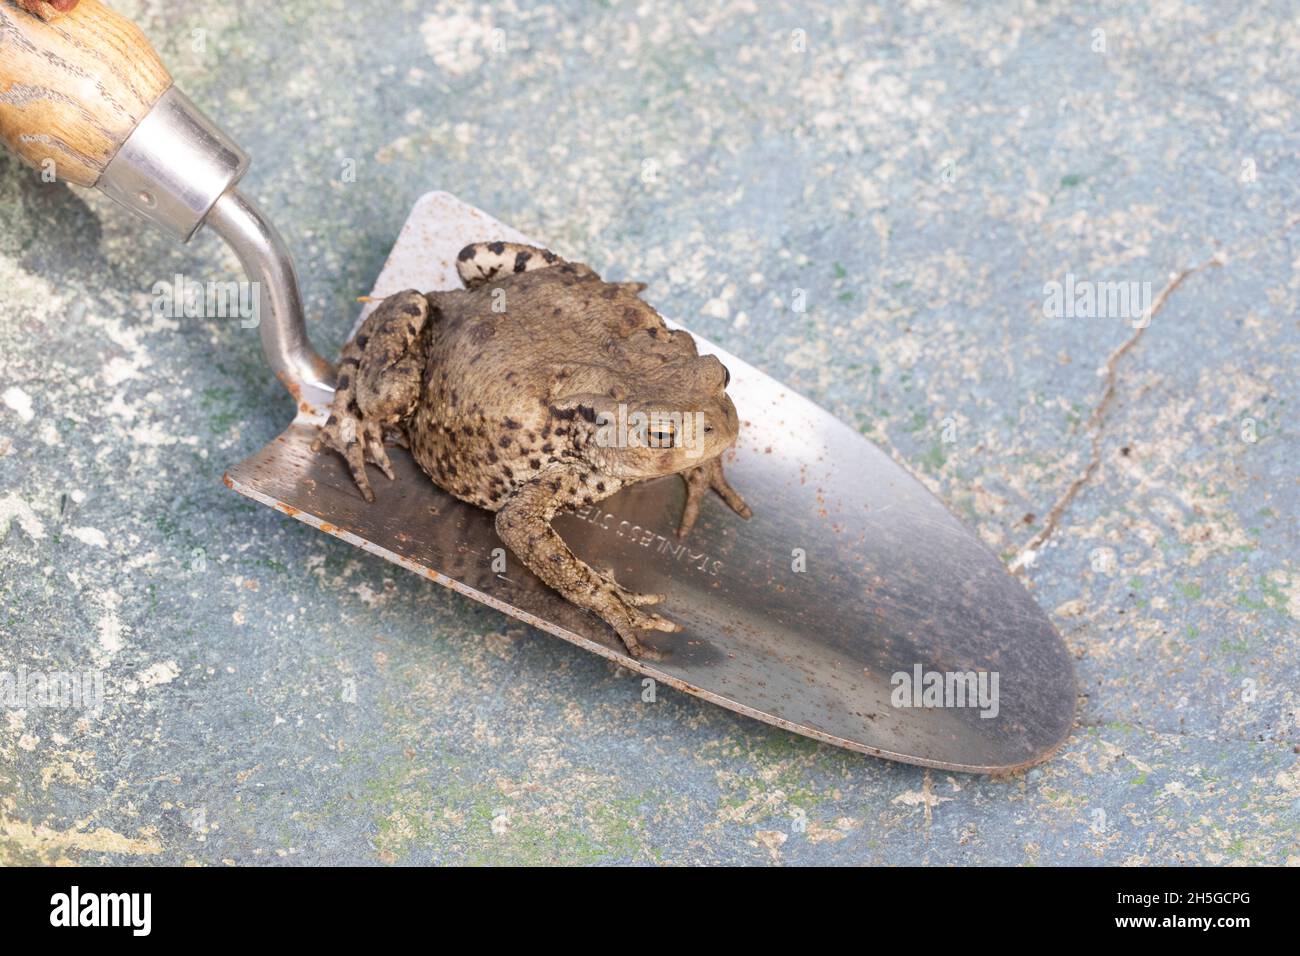 European Common Toad (Bufo bufo). Sitting on a gardener’s trowel. Means of considerate careful transfer to alternative niche site within garden area. Stock Photo